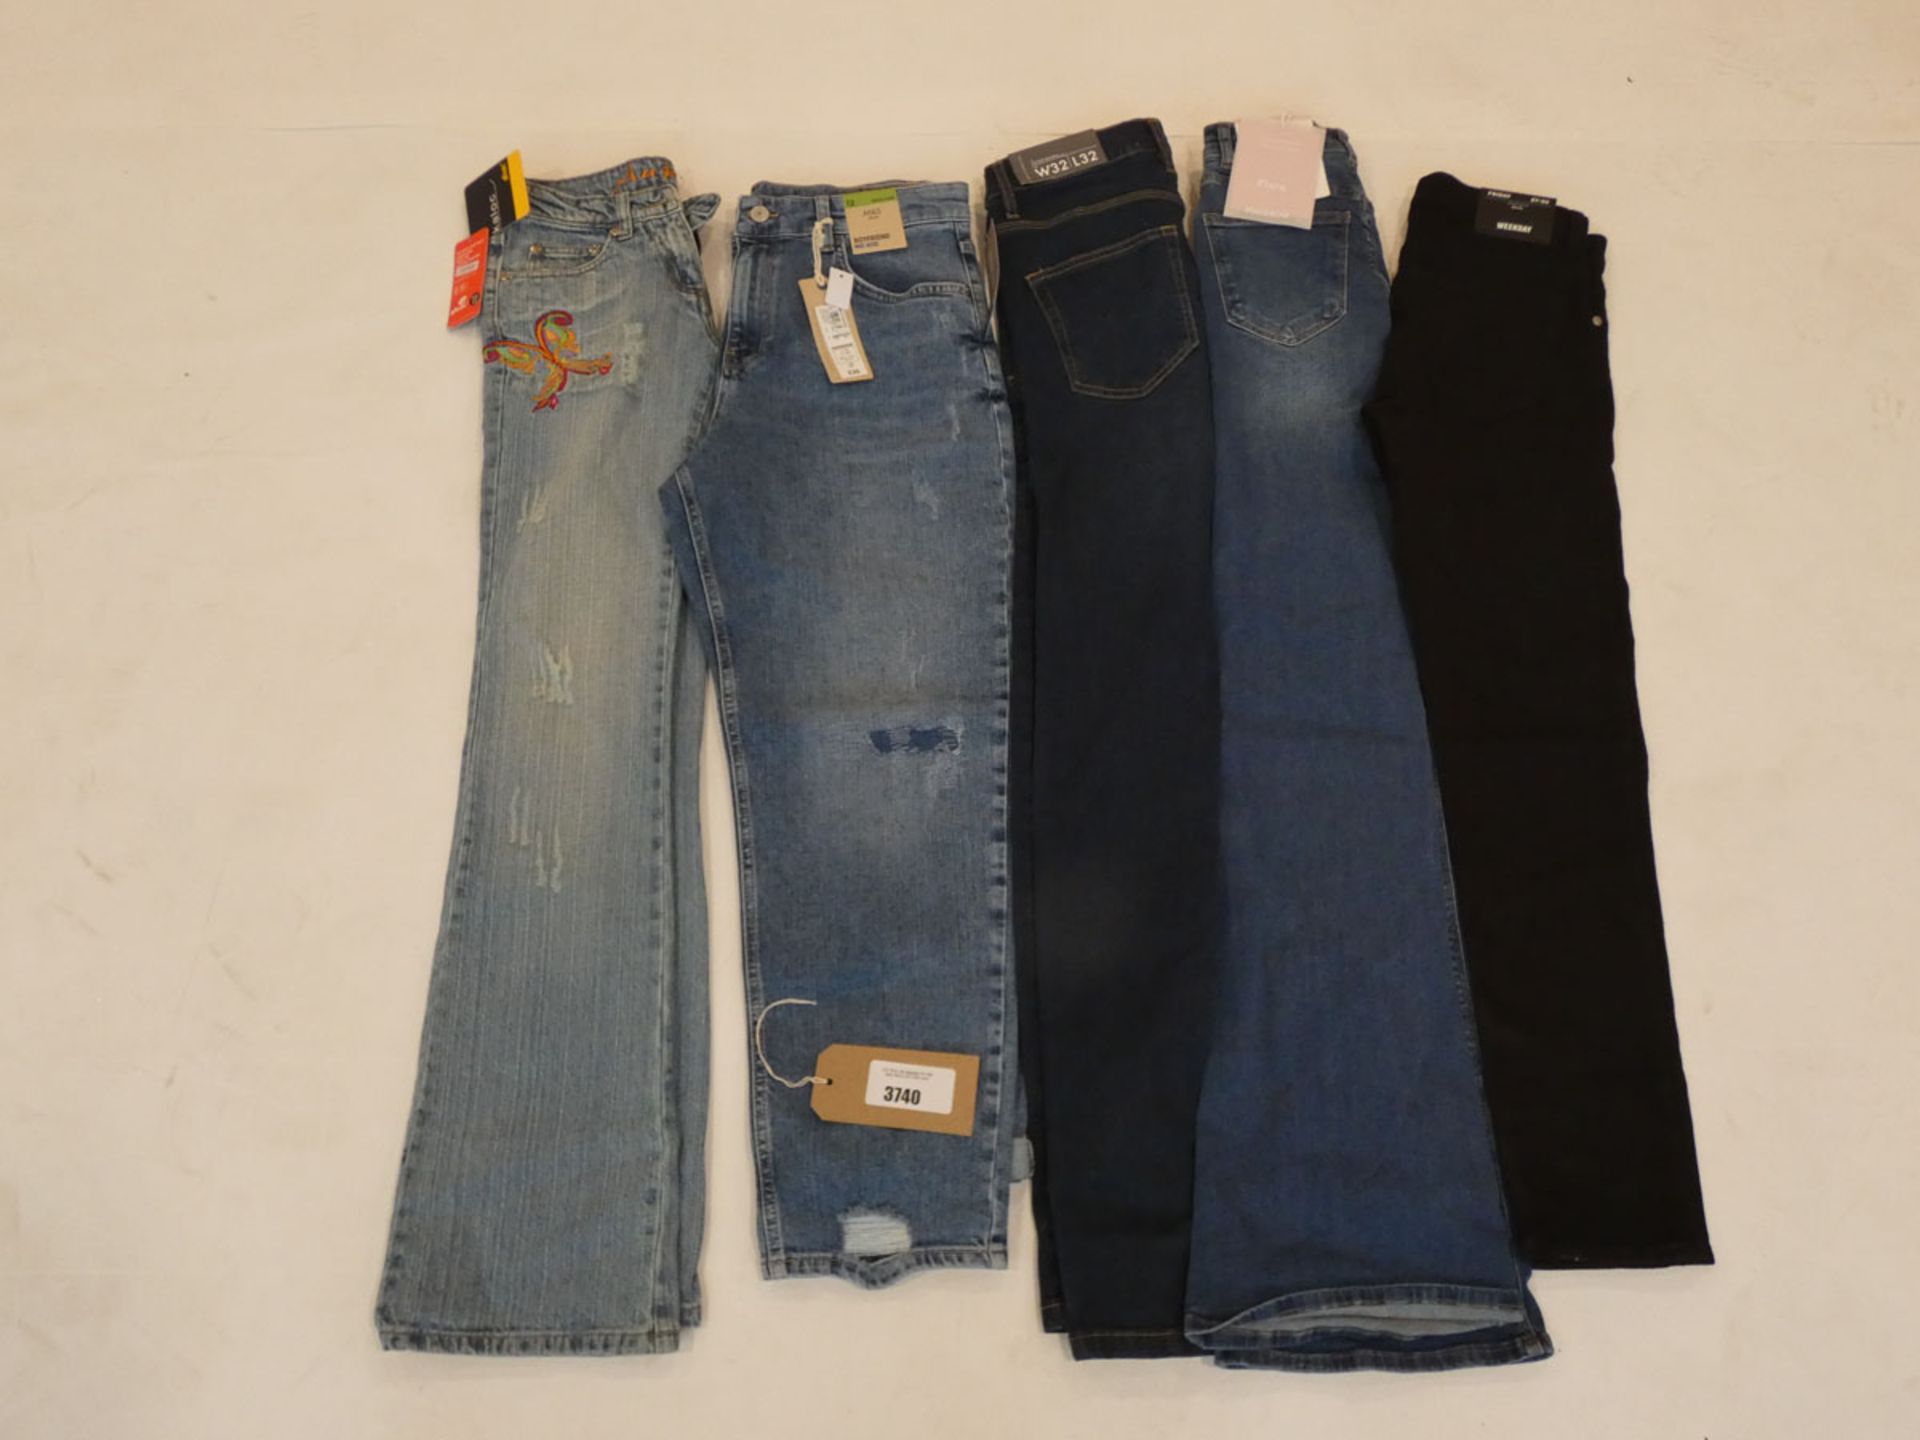 Selection of denim wear to include Kaloc, Pull & Bear, M&S, etc - in various sizes